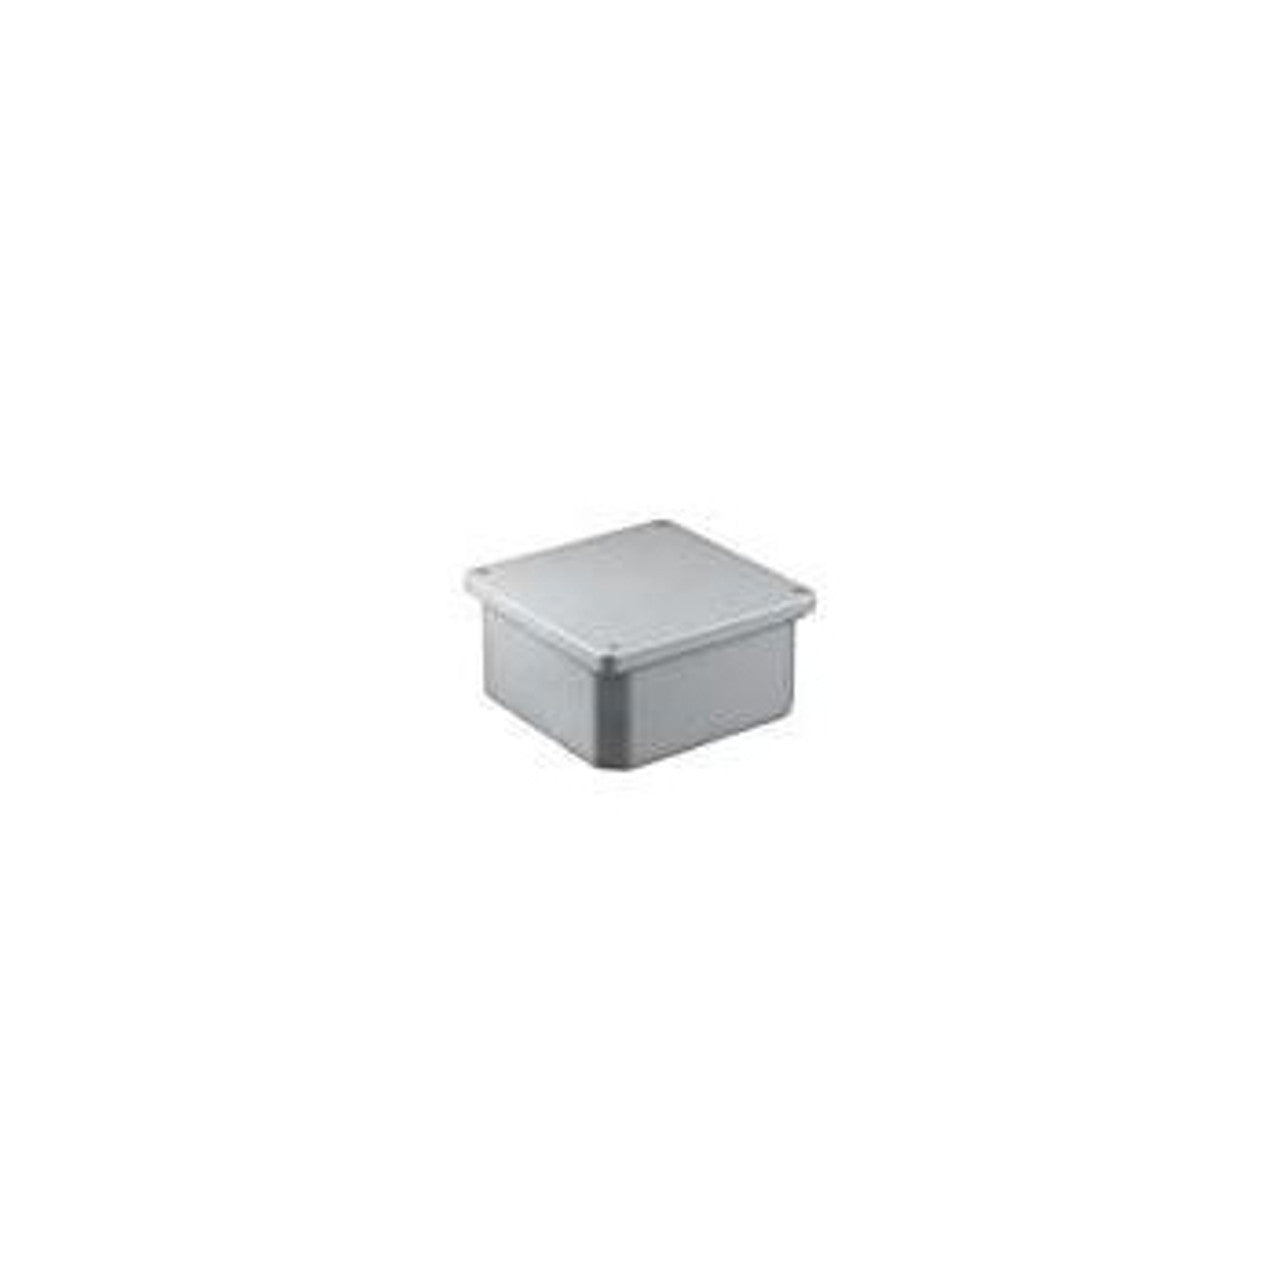 ROYAL RJB884 Conduit Junction Box With Gasket, 8 x 8 x 4 in